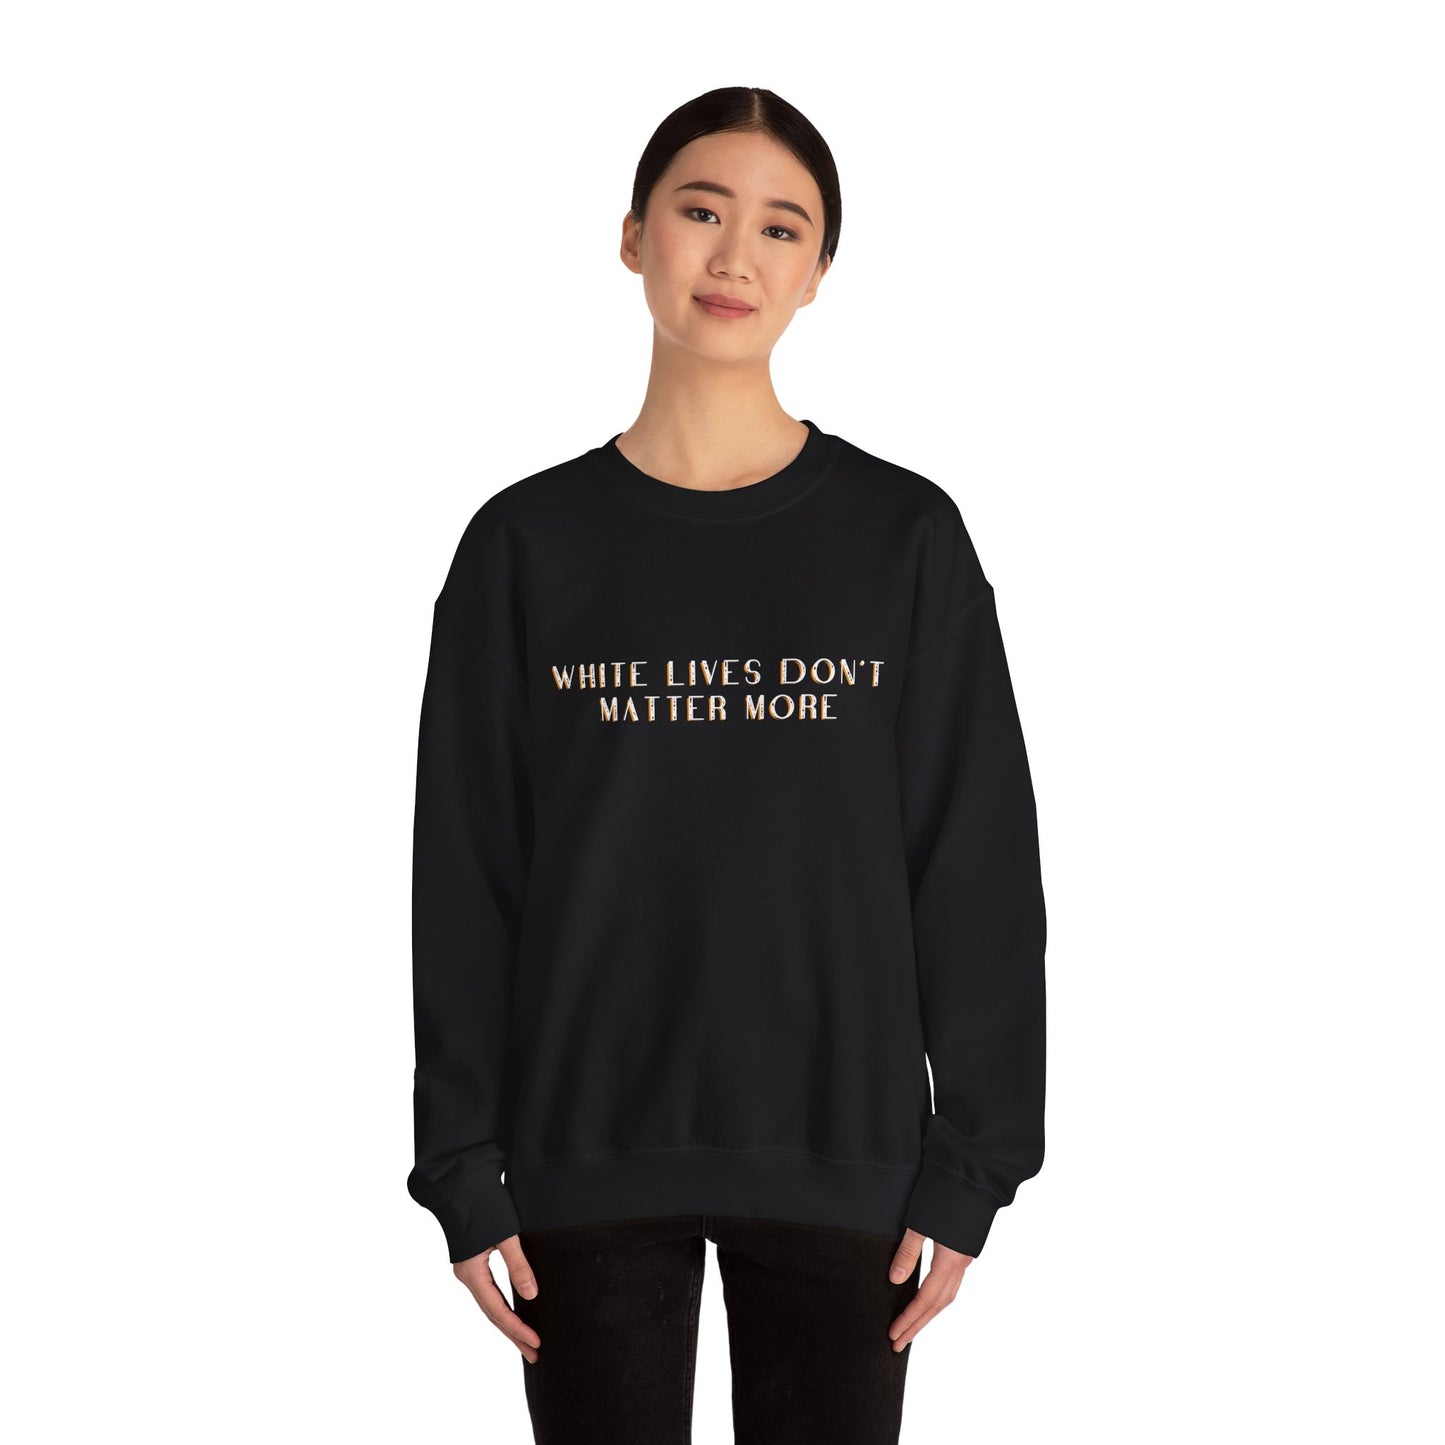 "White Lives Don't Matter More" Crewneck Sweatshirt Black, with Heavy Text Only